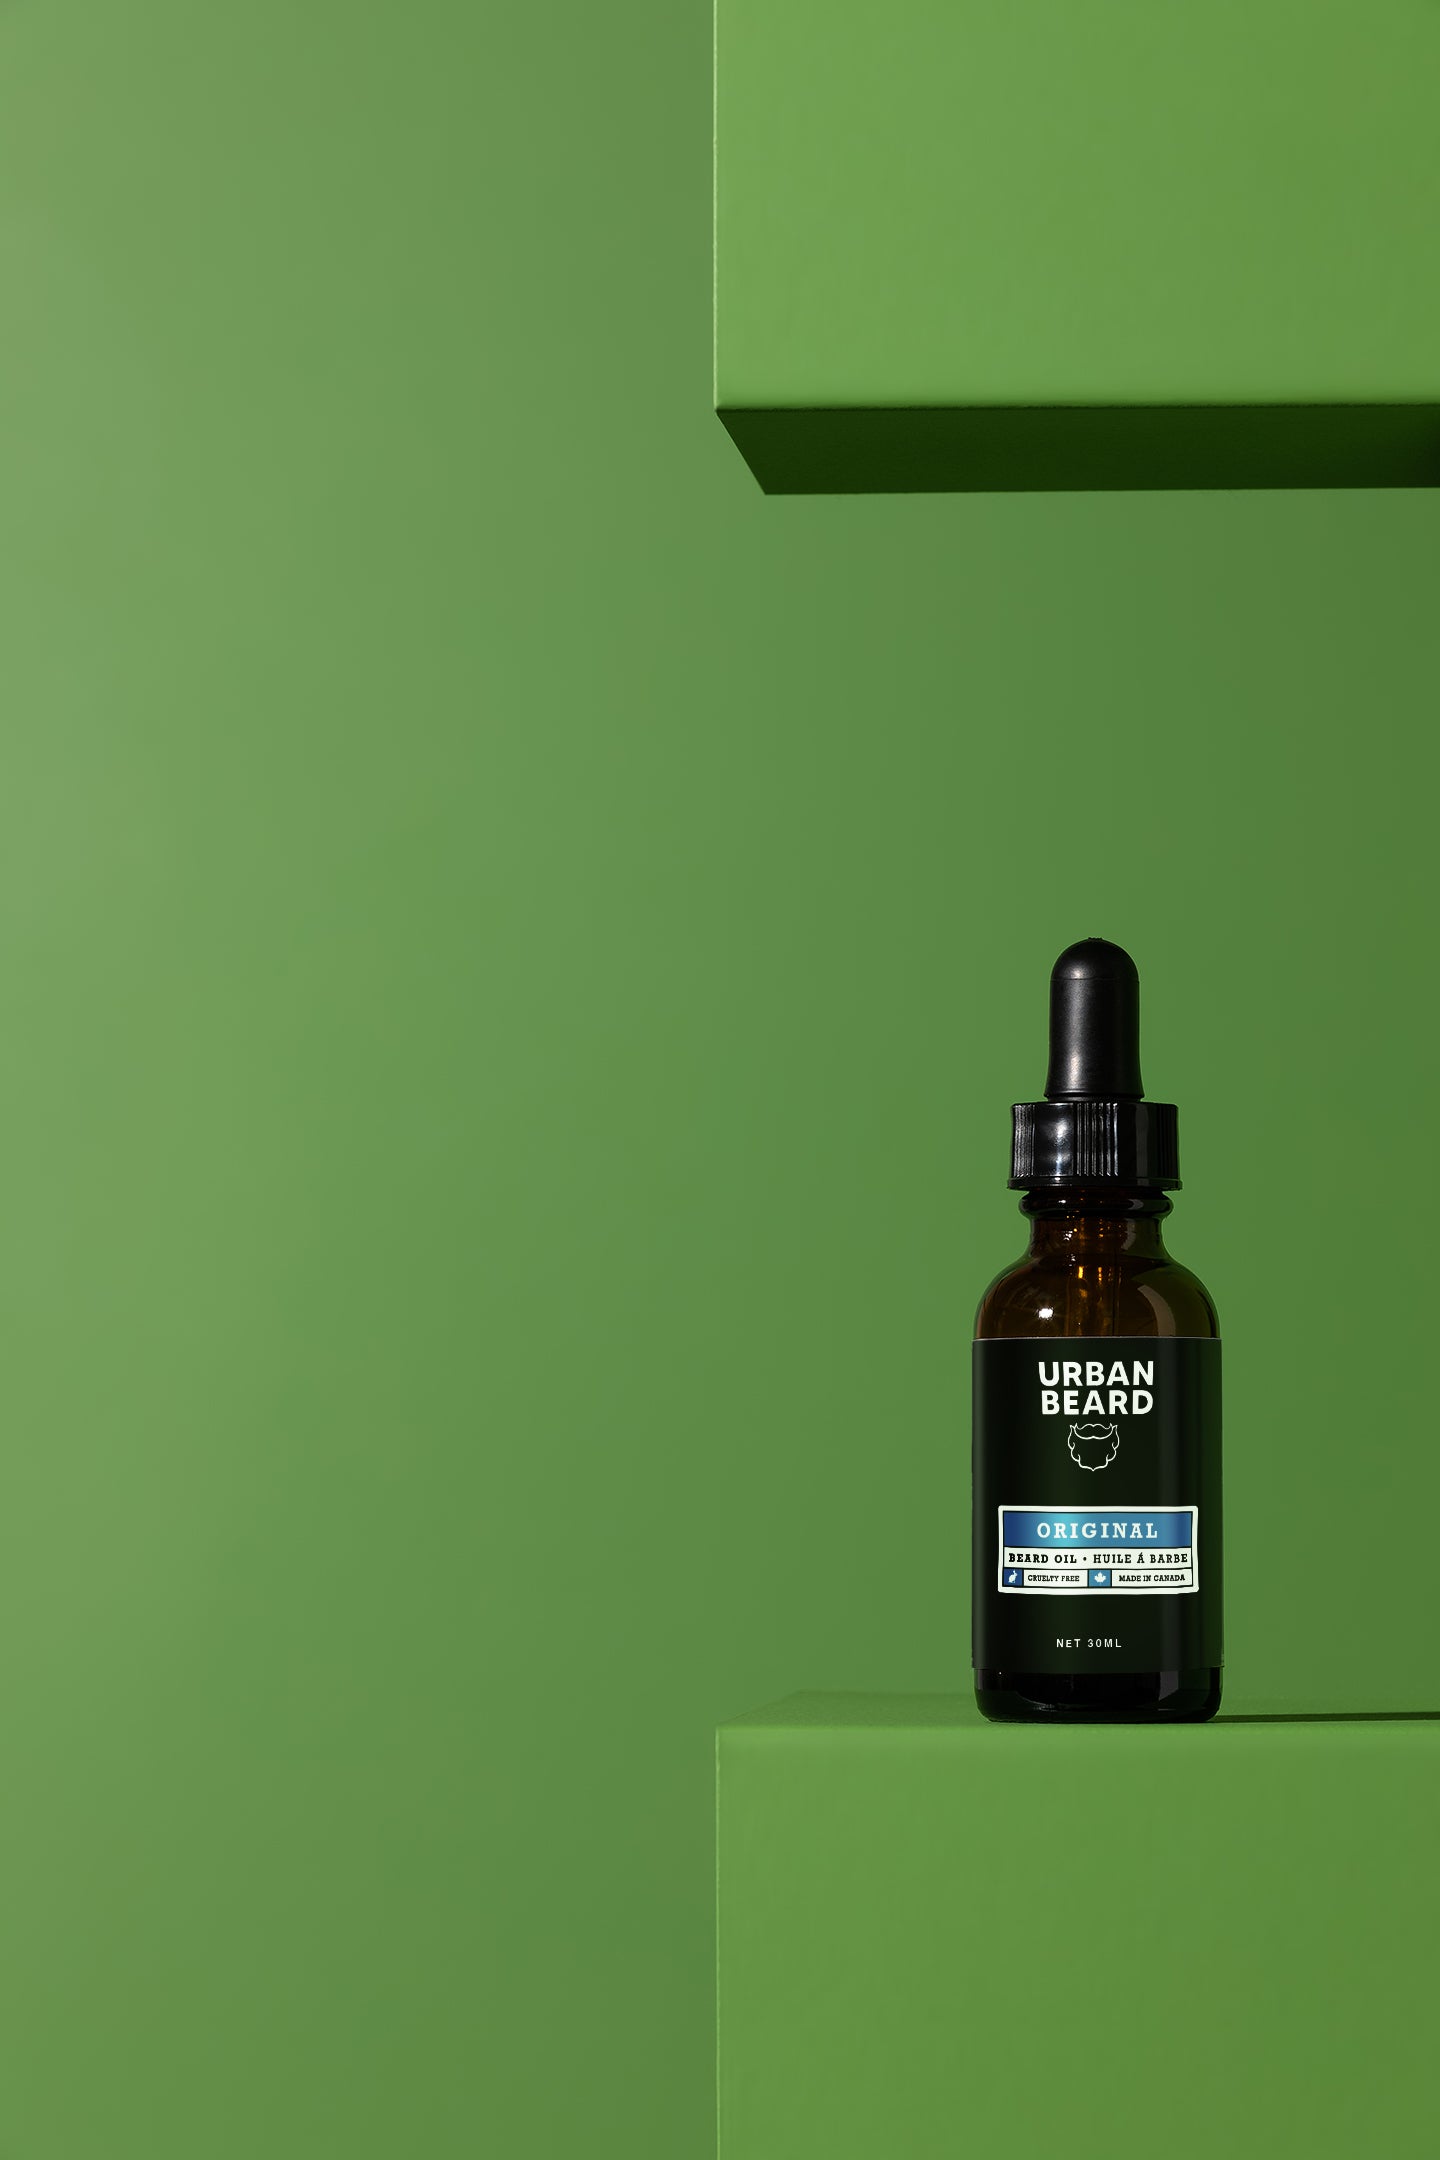 Organic & vegan friendly Beard Oil: The scent is Cedarwood with a hint of lavender. Do you want a healthy beard? Look no further than our range of natural beard products. Each with there own scent and beatifying ingredients.